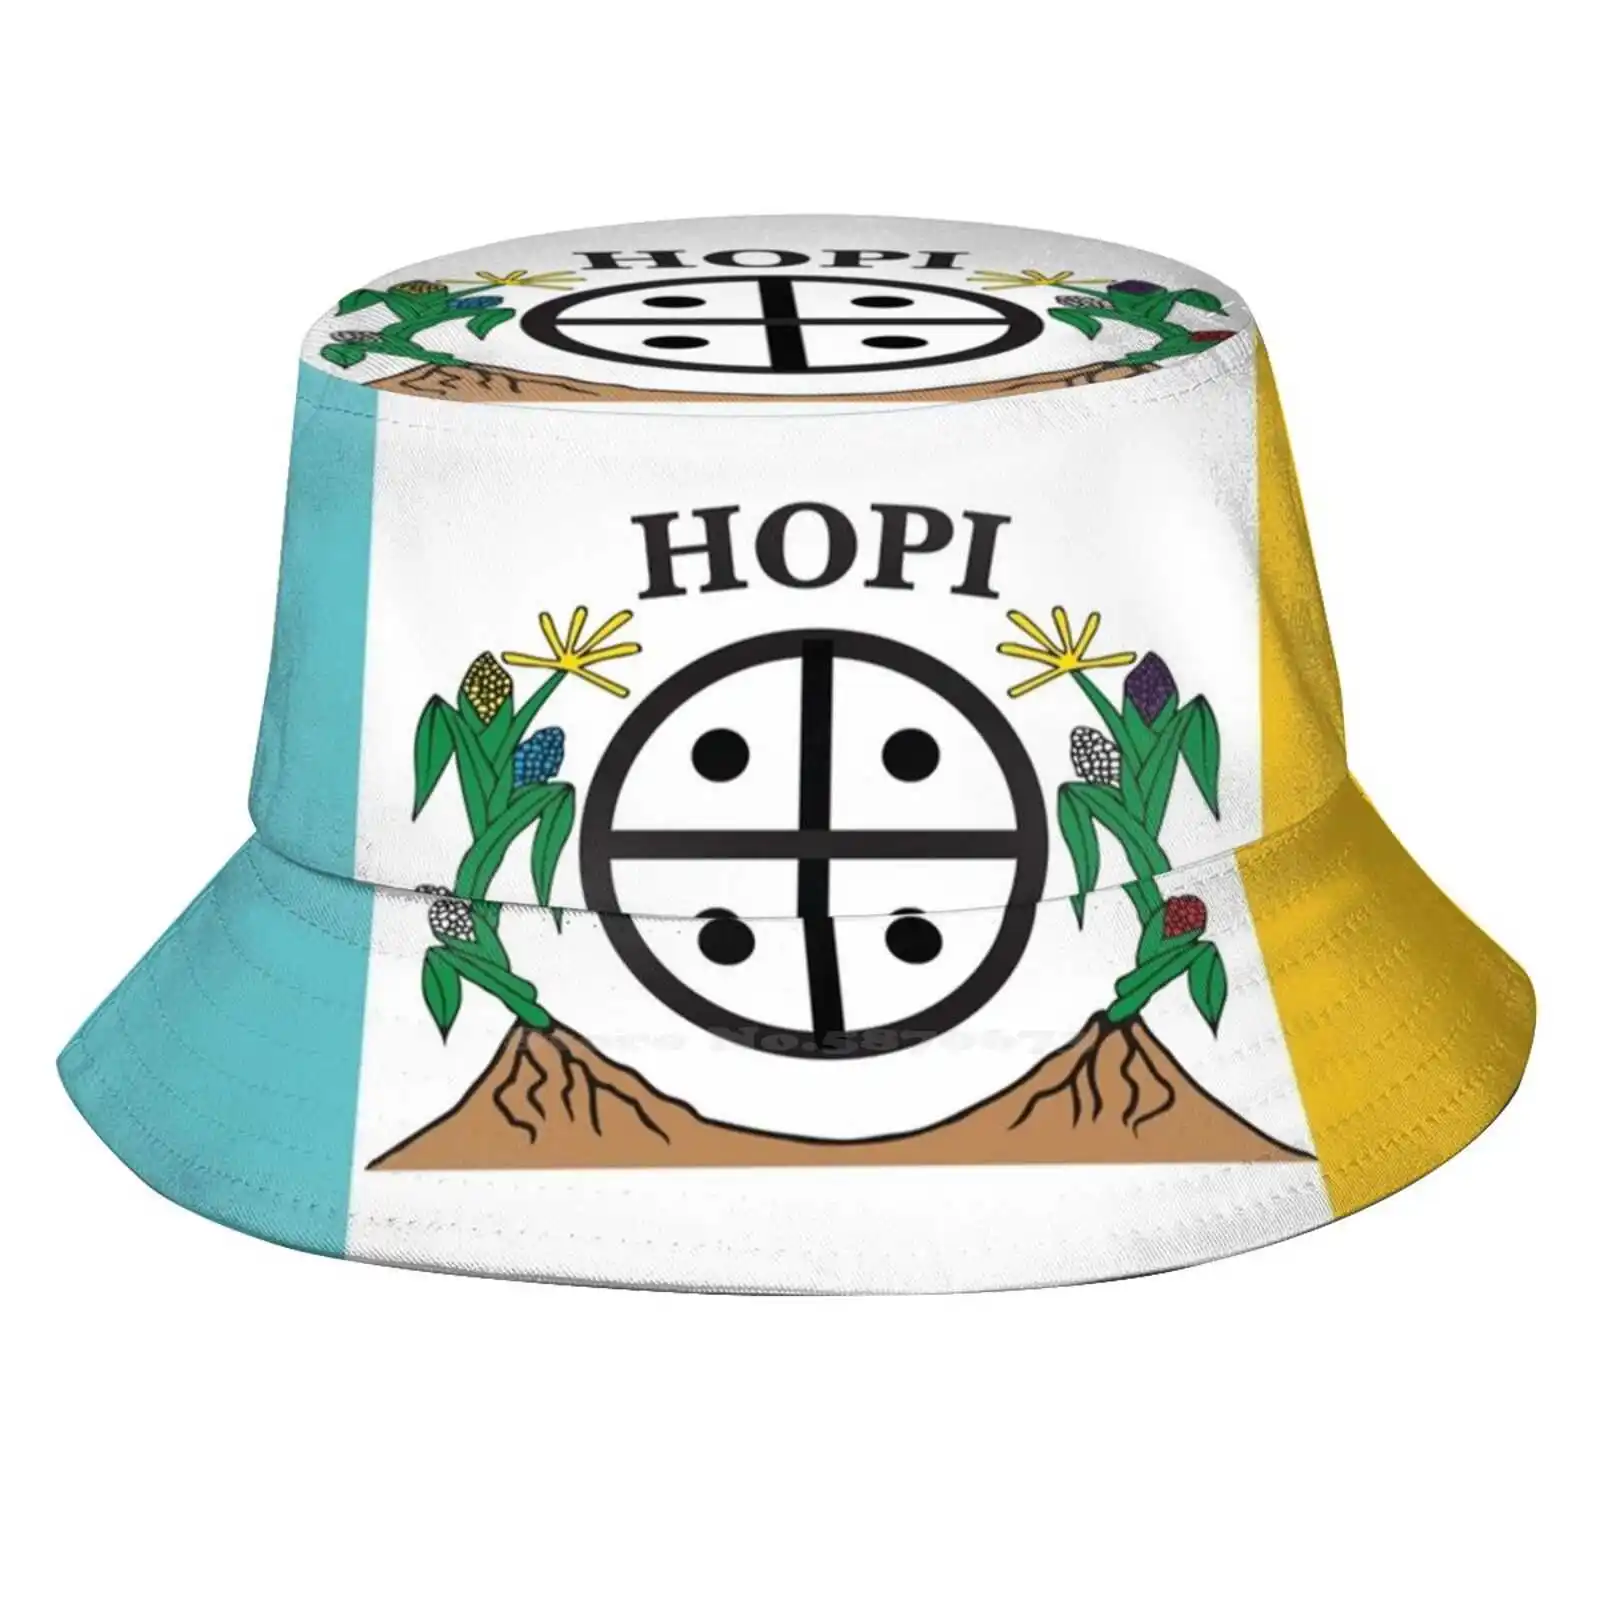 Hopi Nation Flag Naatoyla Tricolour White Yellow Turquoise With Corn And Hopi Symbol Hd High Quality Pattern Hats Outdoor Hat